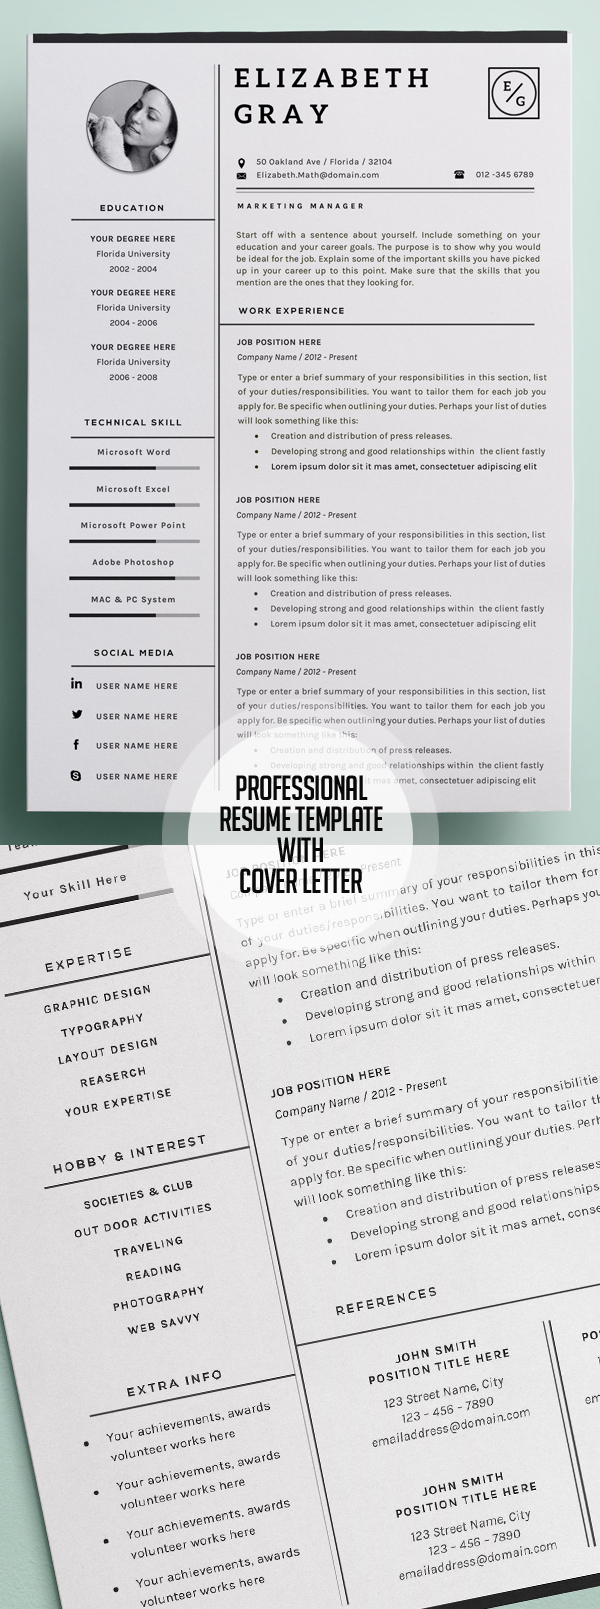 50 Best Resume Templates For 2018 - 30